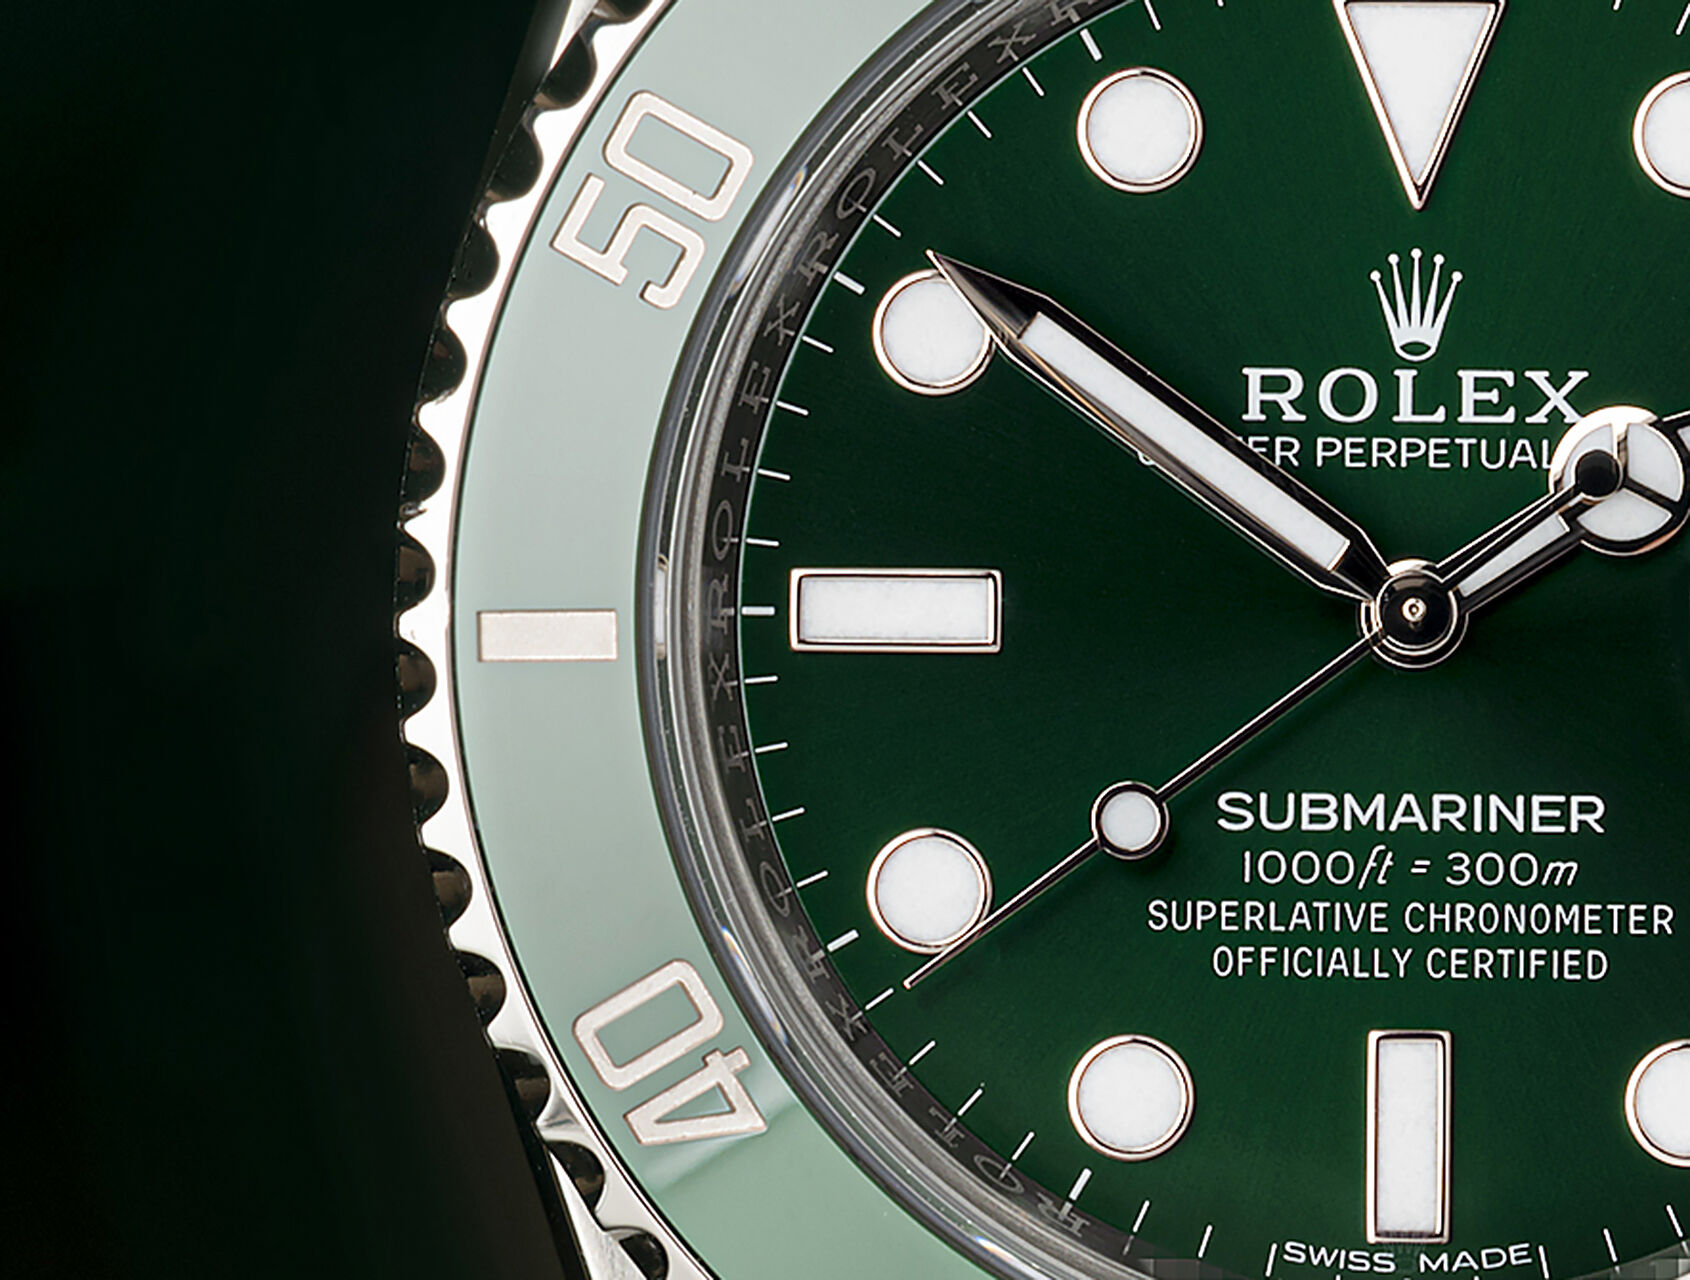 ref 116610LV | 116610LV - Box & Papers | Rolex Submariner Date